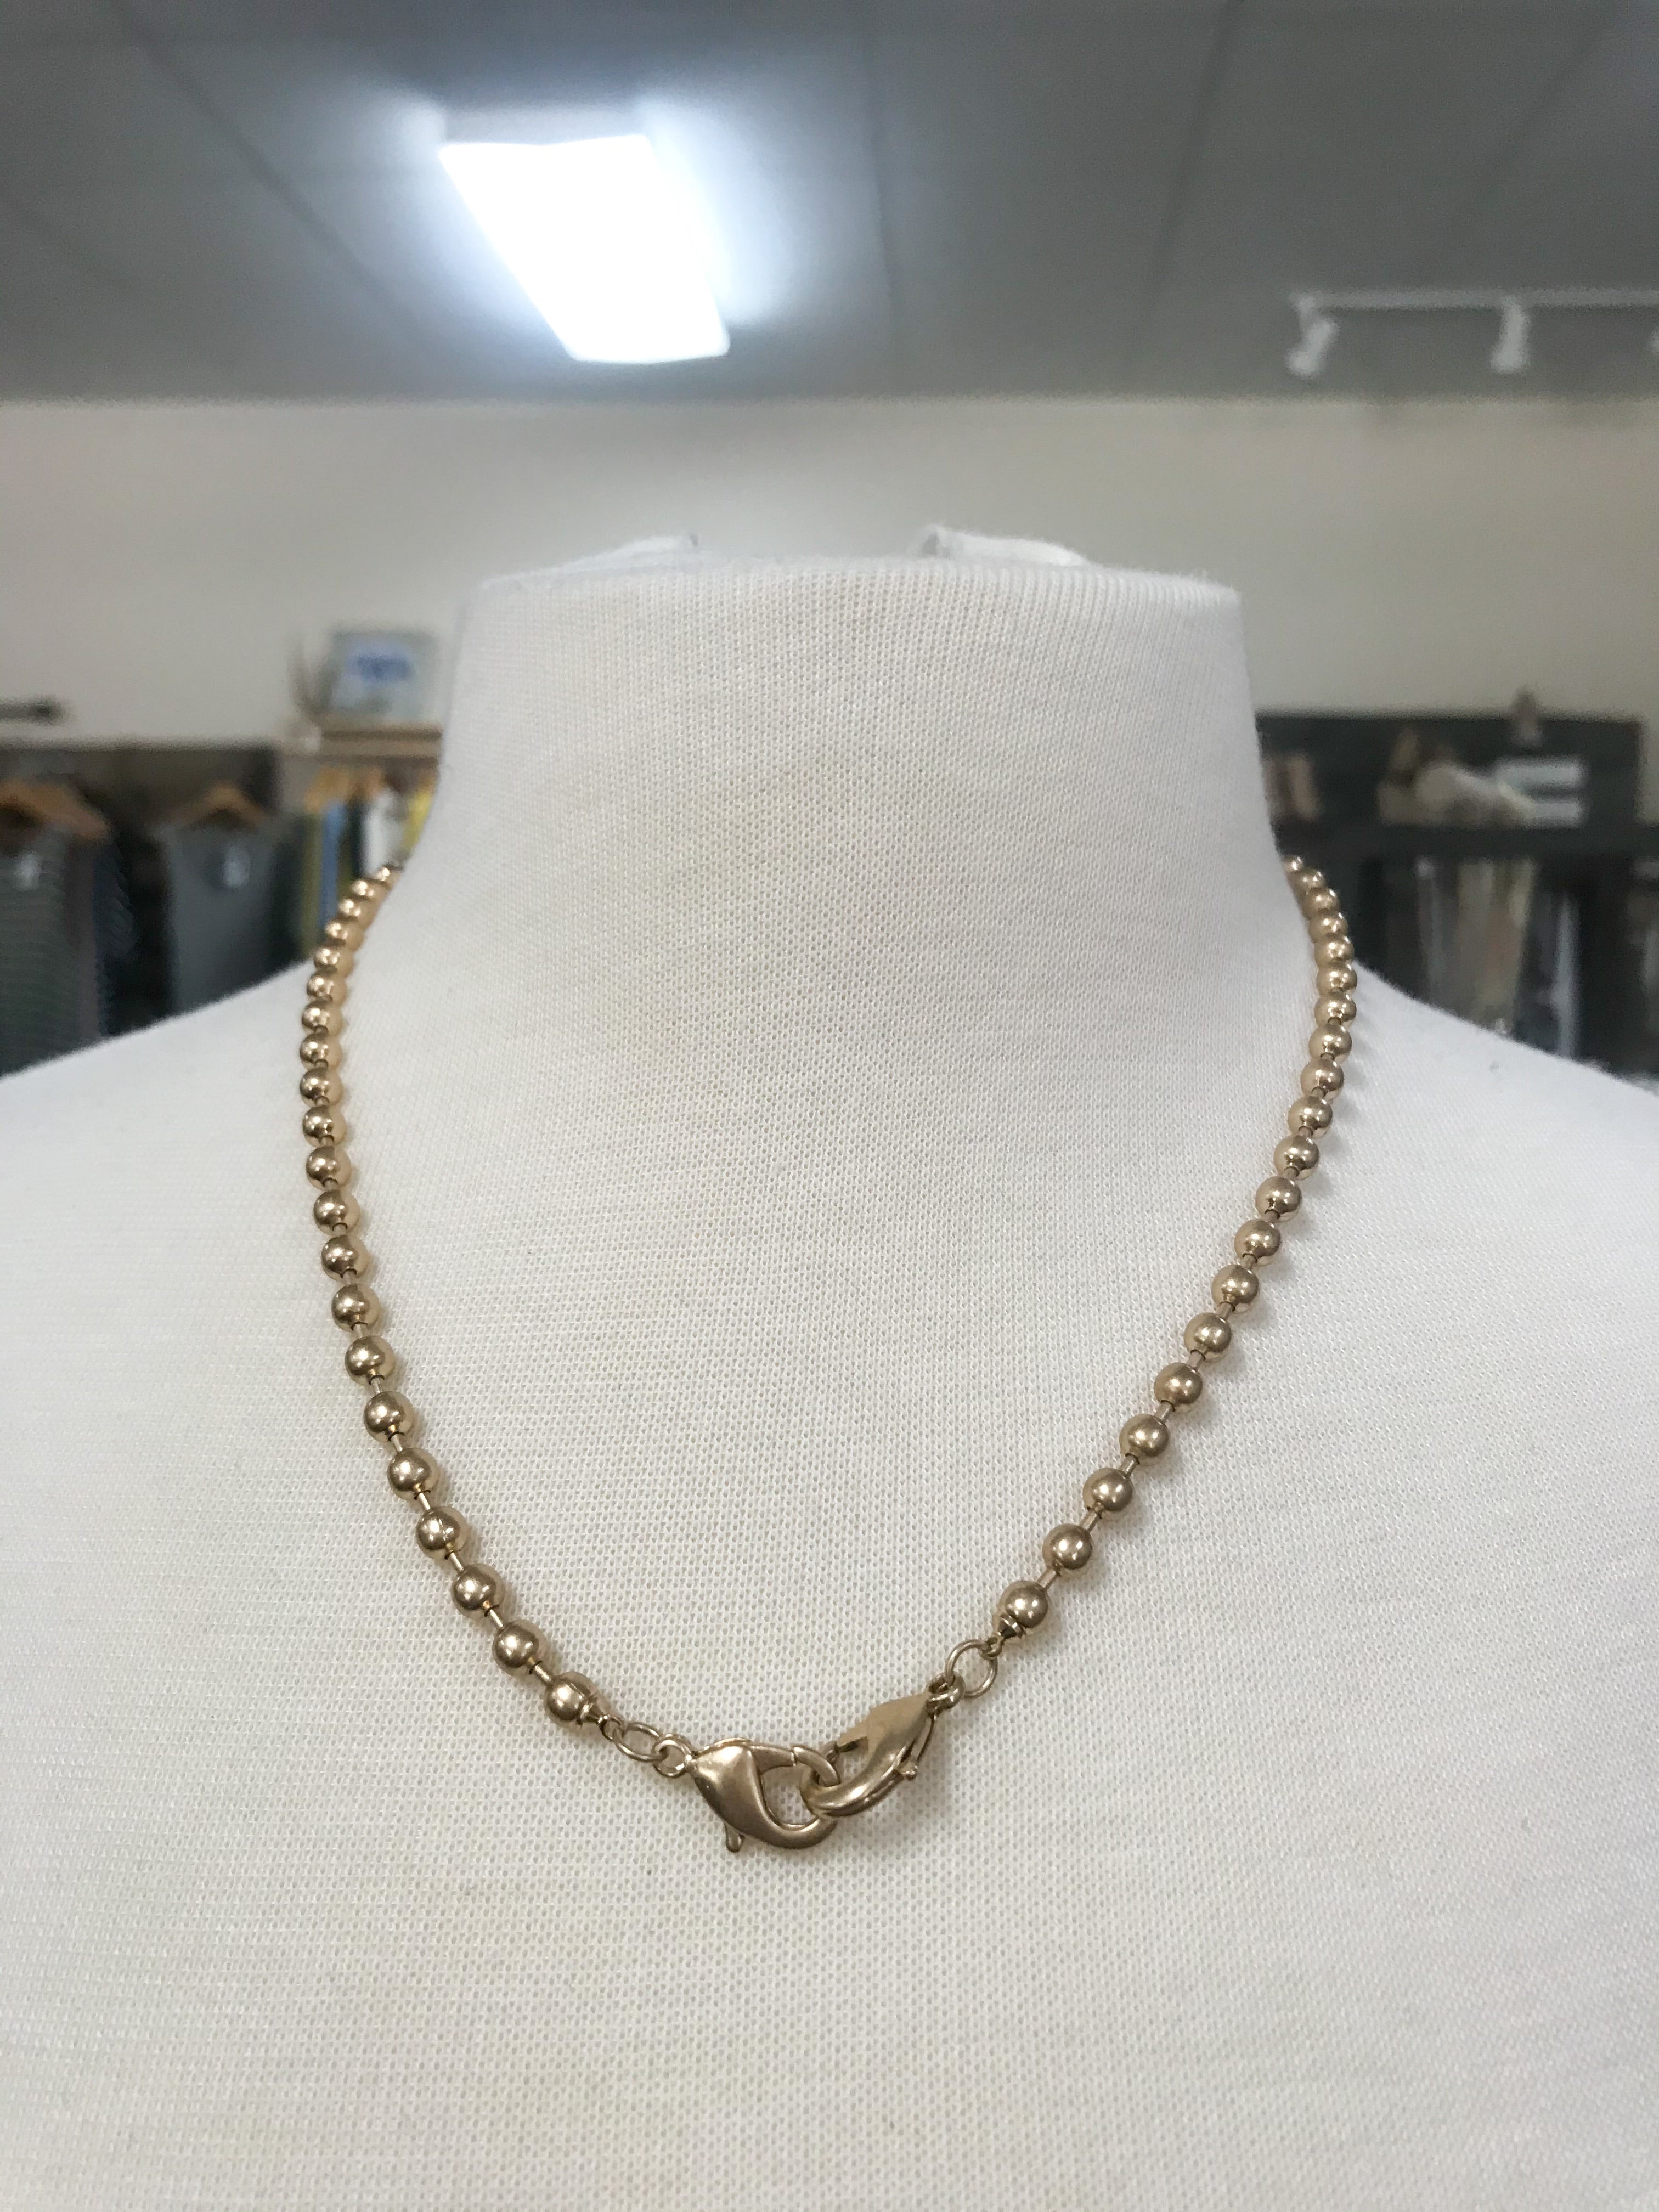 FACE MASK CHAIN NECKLACE